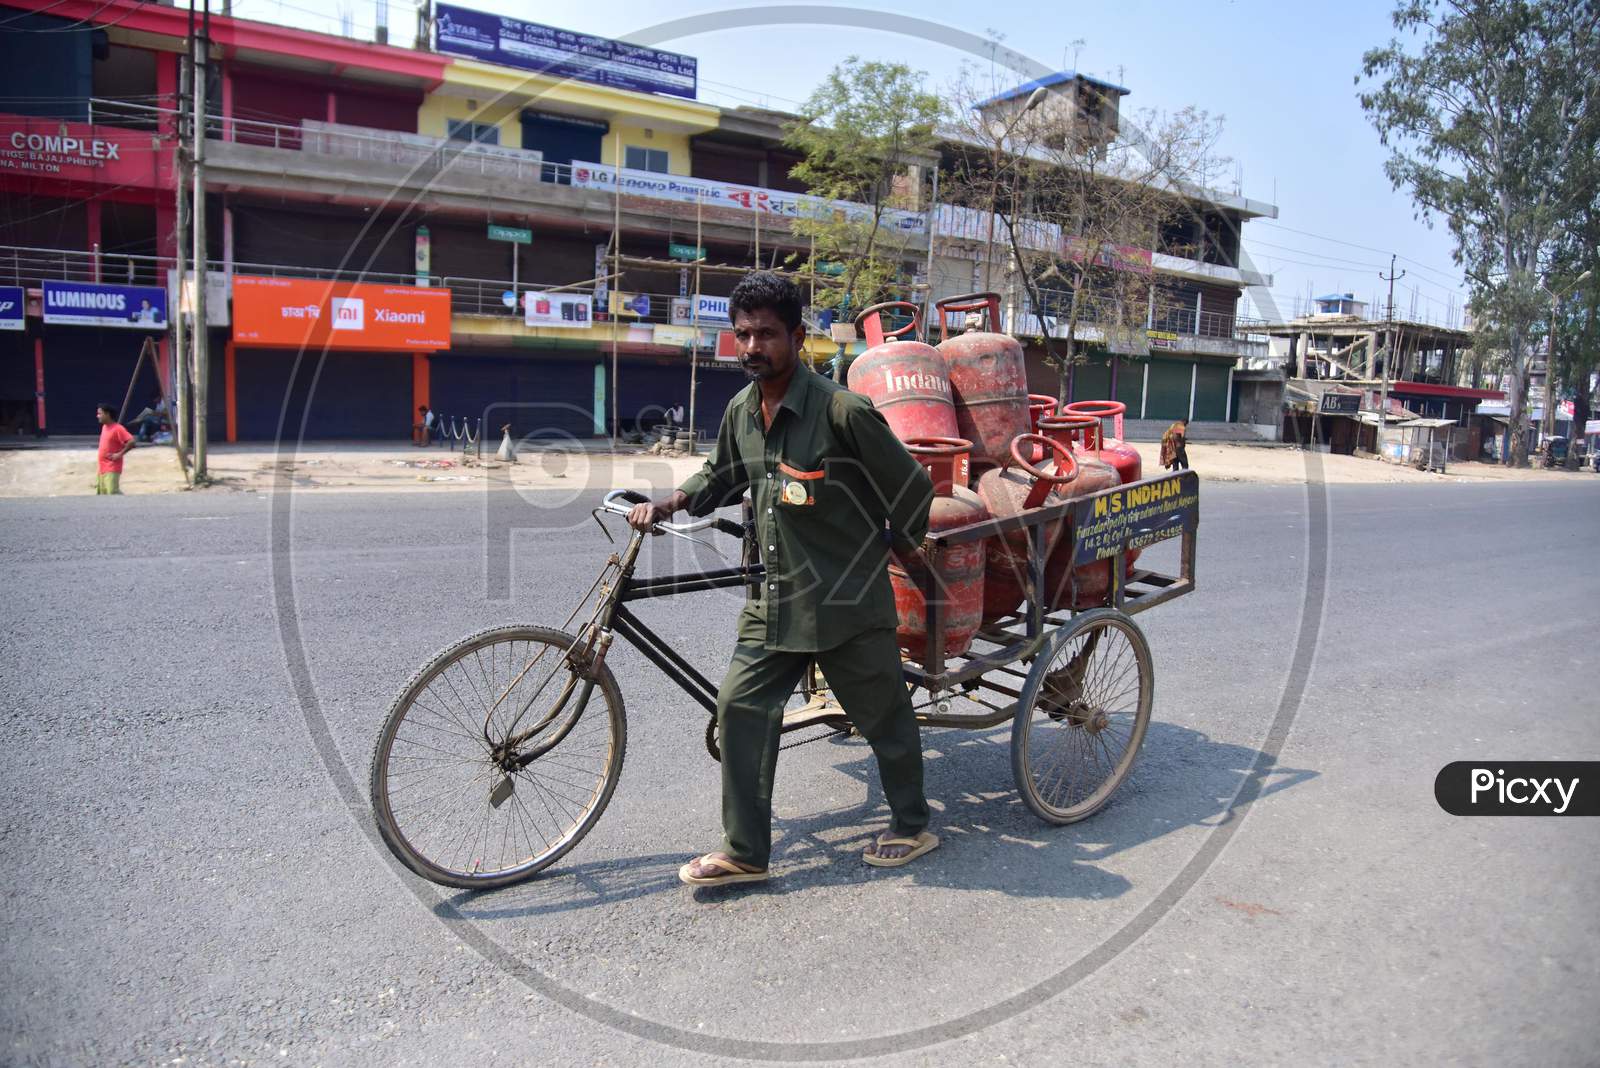 A Workers Wearing Protective Masks Push A Cart With Lpg Cylinders During A Nationwide Lockdown In The Wake Of Coronavirus Pandemic, In Nagaon District Of Assam,India